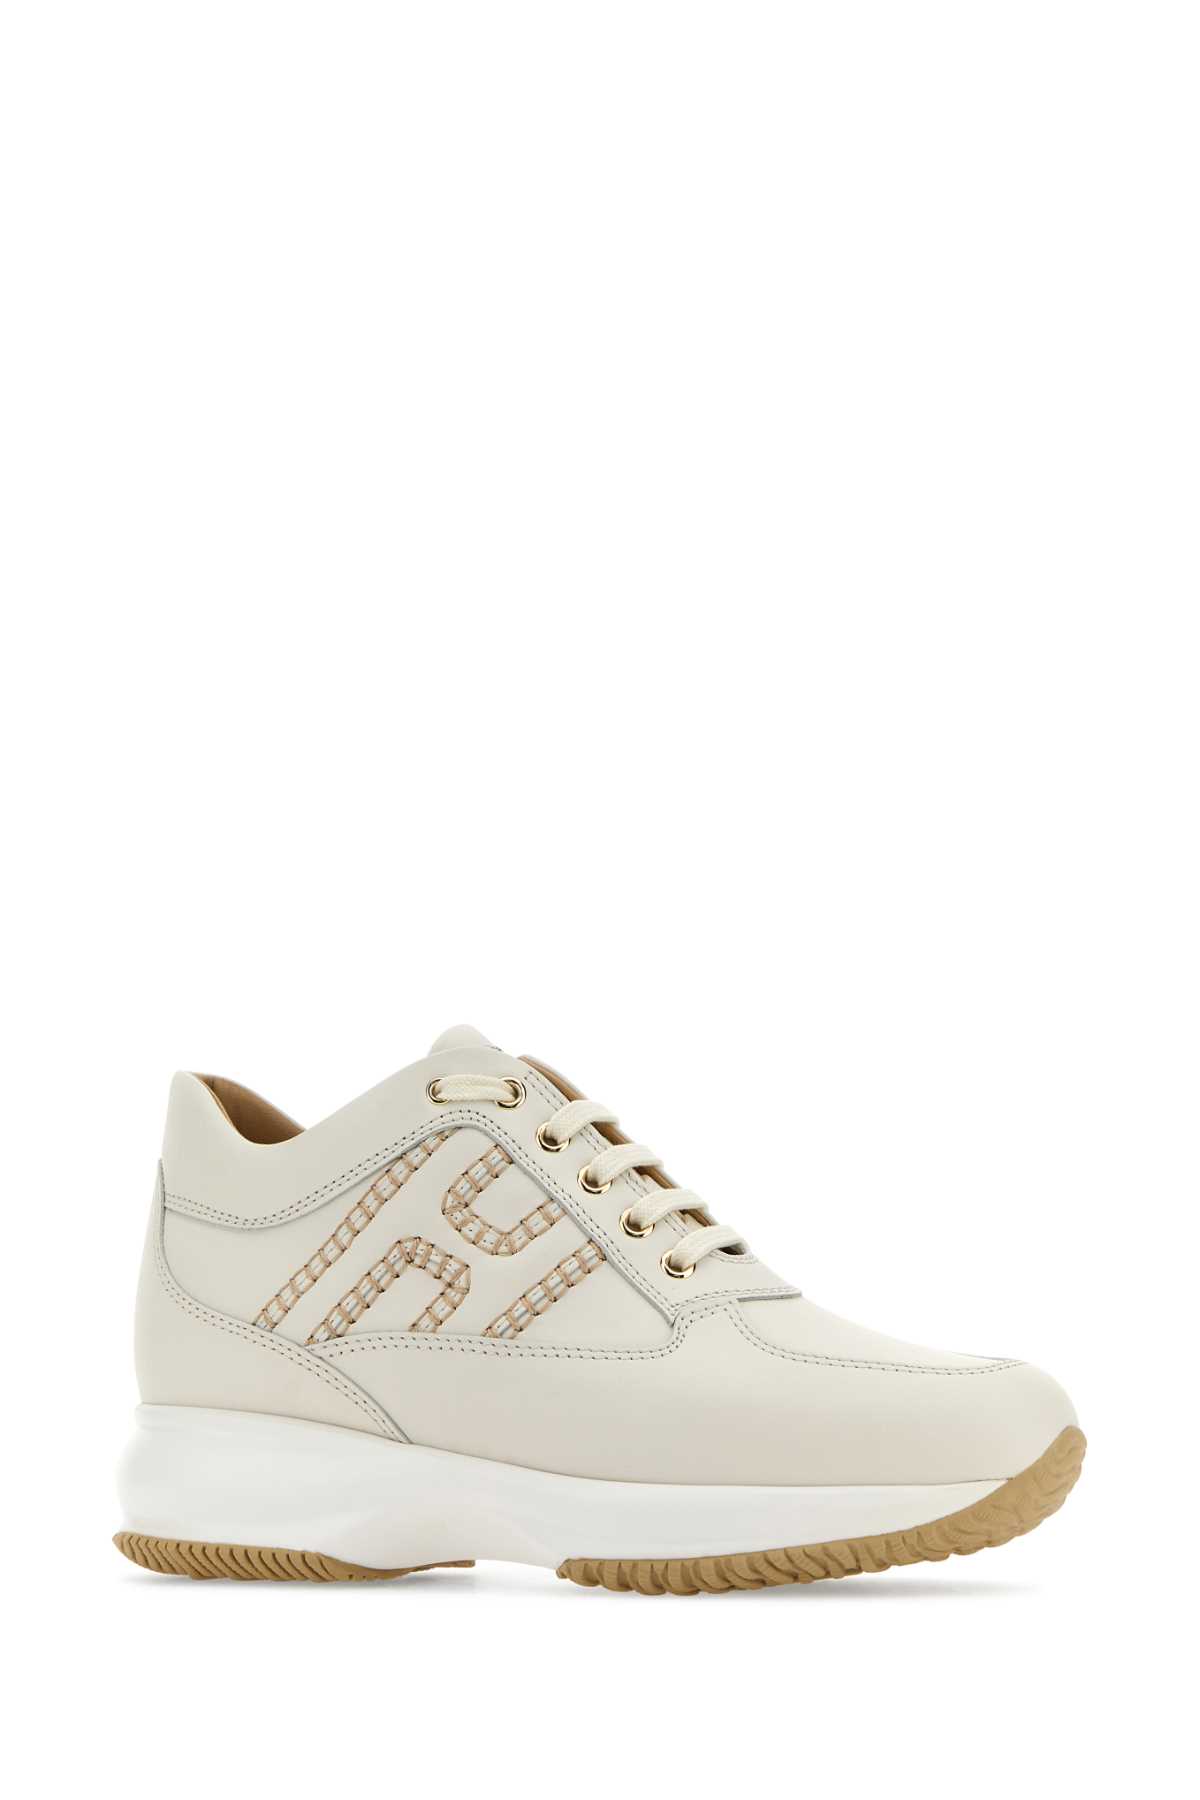 Shop Hogan Ivory Leather Interactive Sneakers In B013